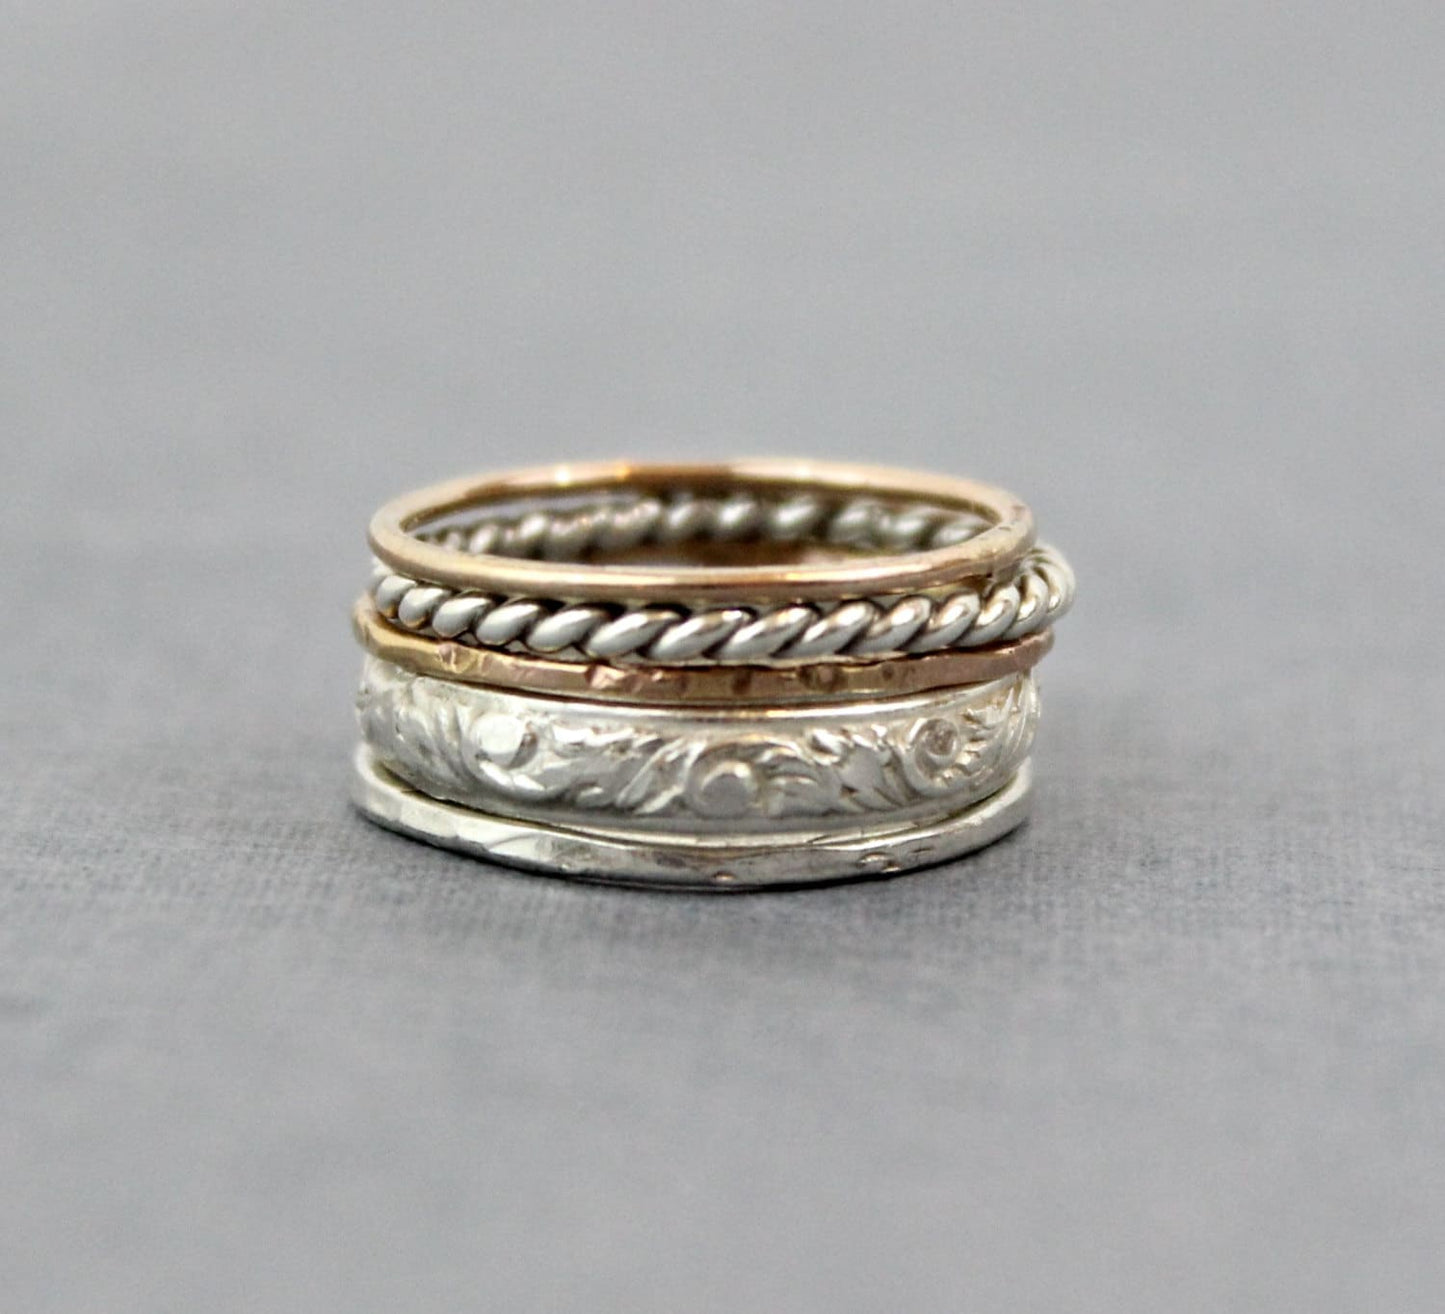 Set of 5 Thick Stacking Rings - Sterling Silver, and 14K Rose Gold Filled - Mixed Metals